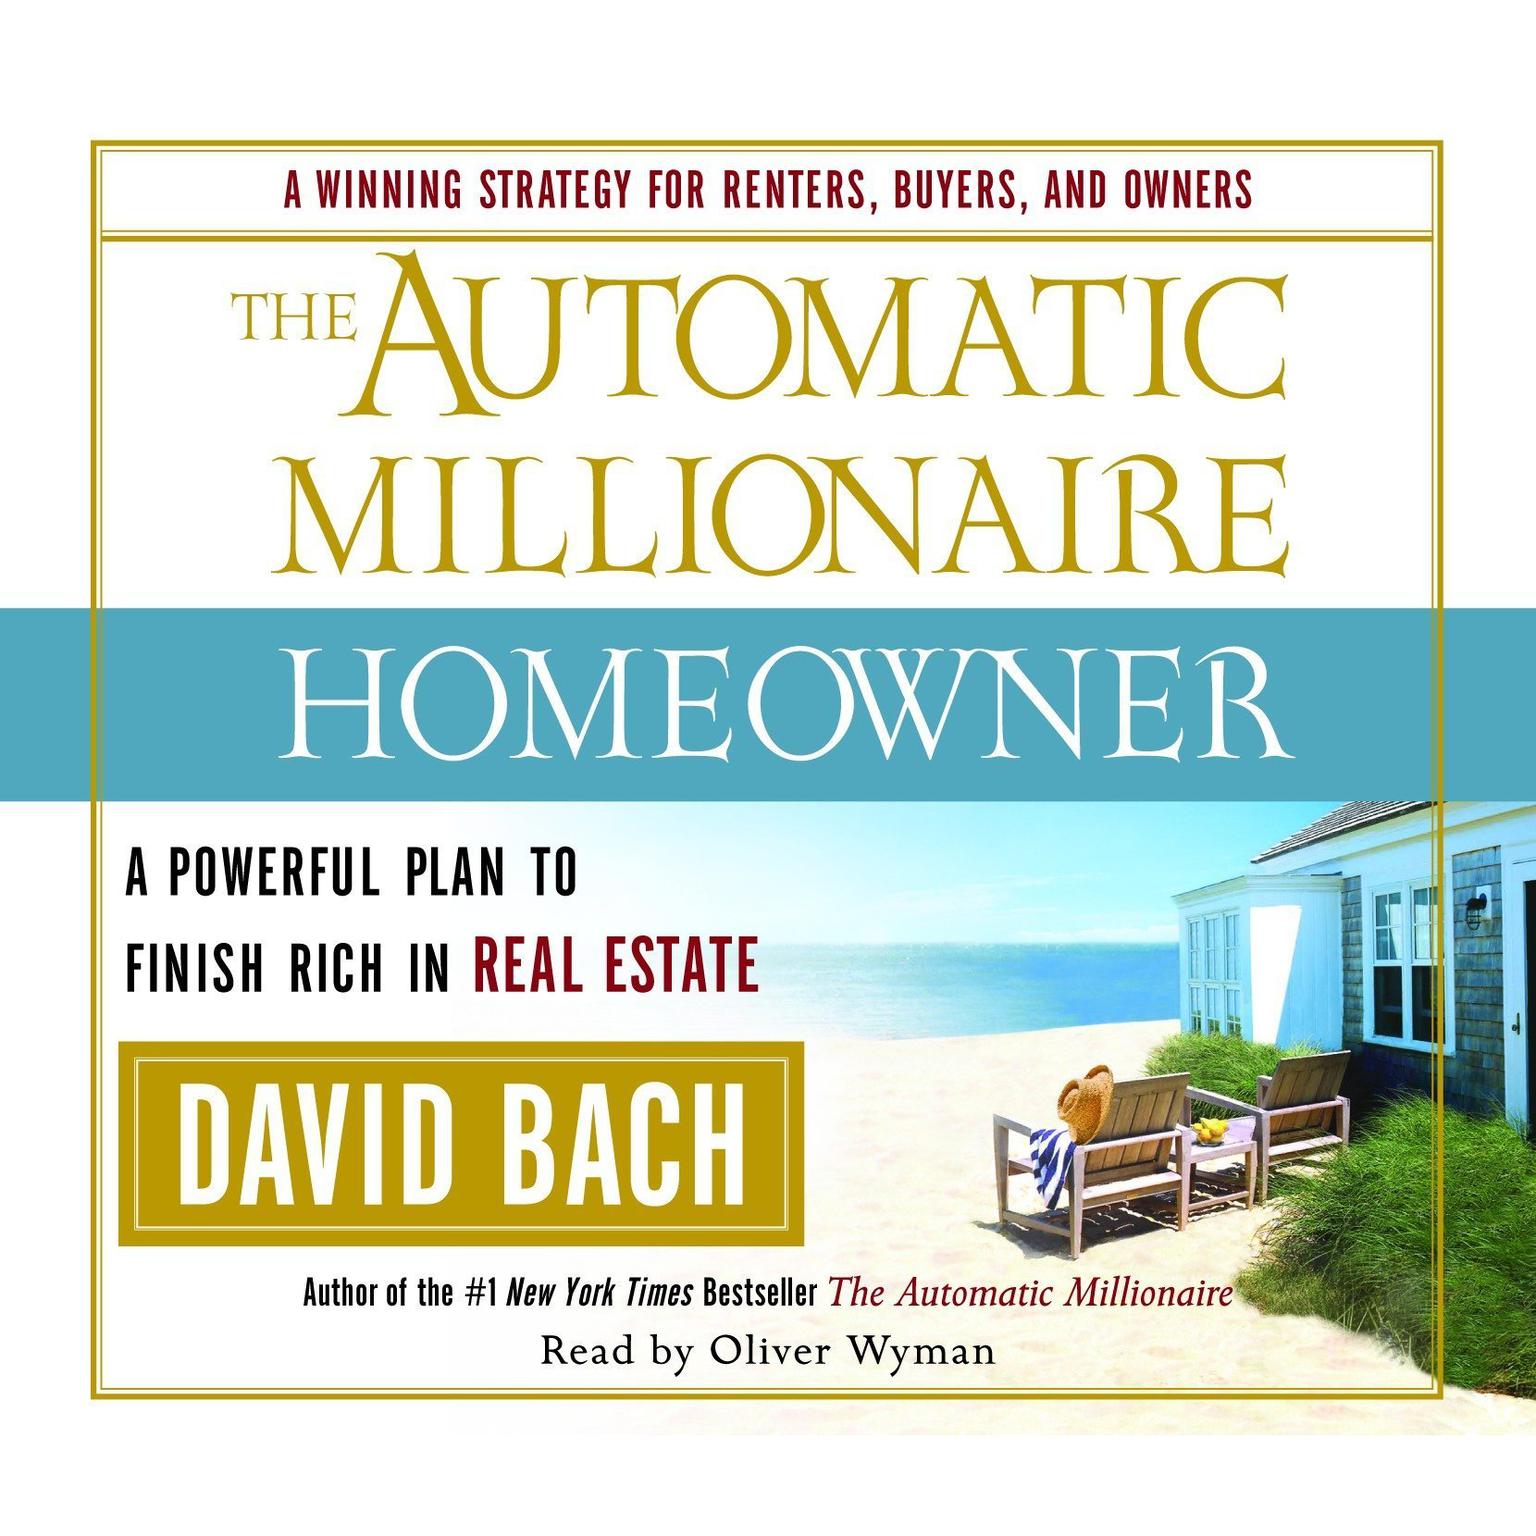 The Automatic Millionaire Homeowner (Abridged): A Powerful Plan to Finish Rich in Real Estate Audiobook, by David Bach